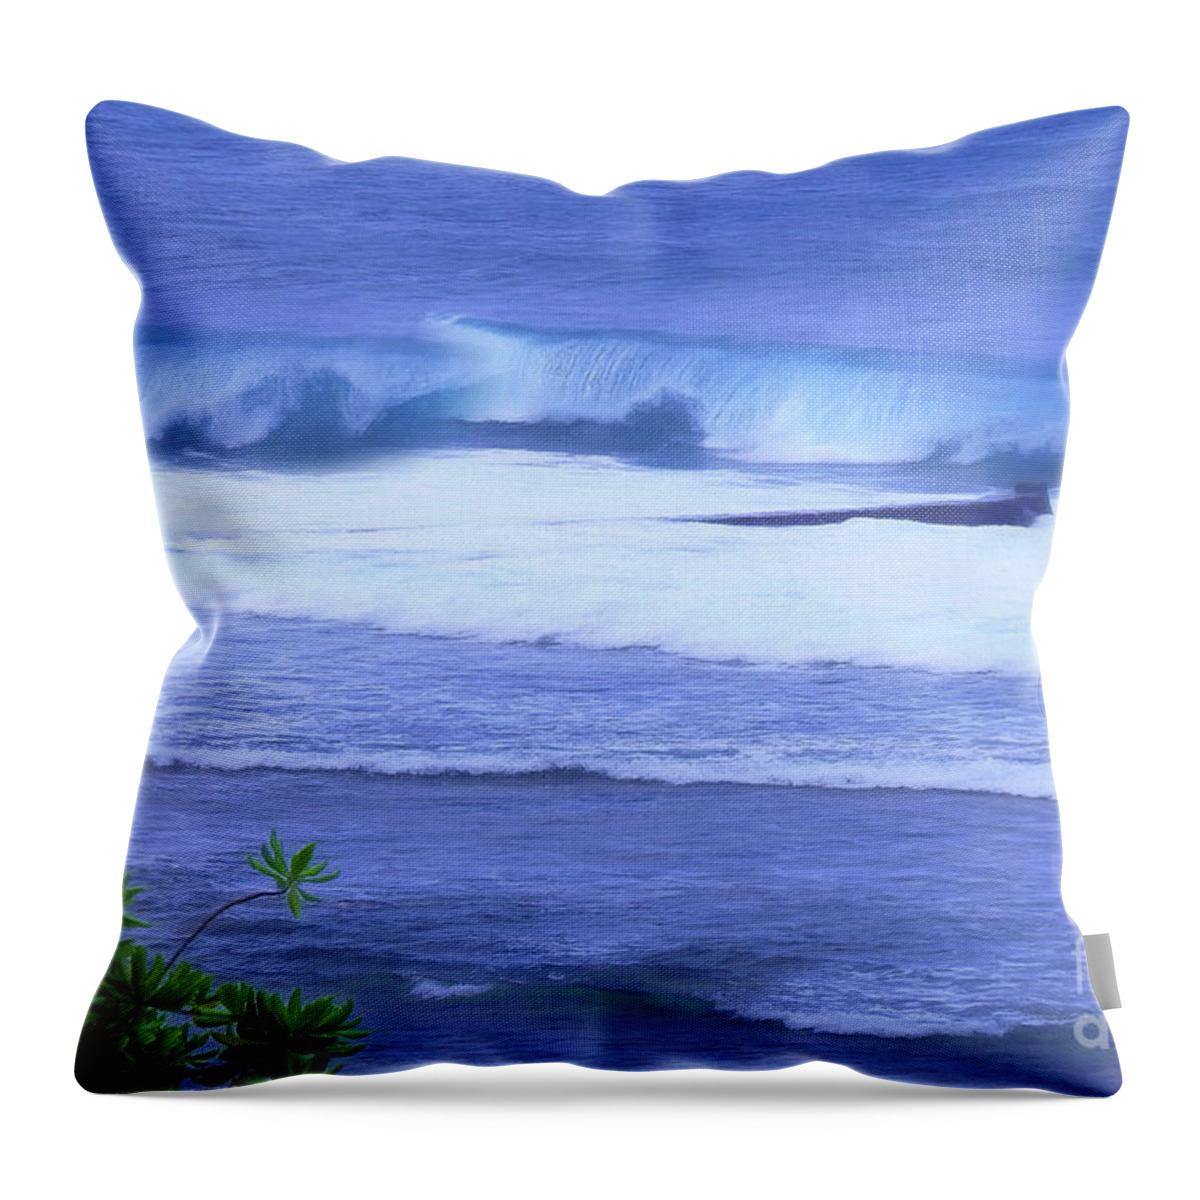 Ocean Waves Throw Pillow featuring the photograph Tropical Seascape by Scott Cameron